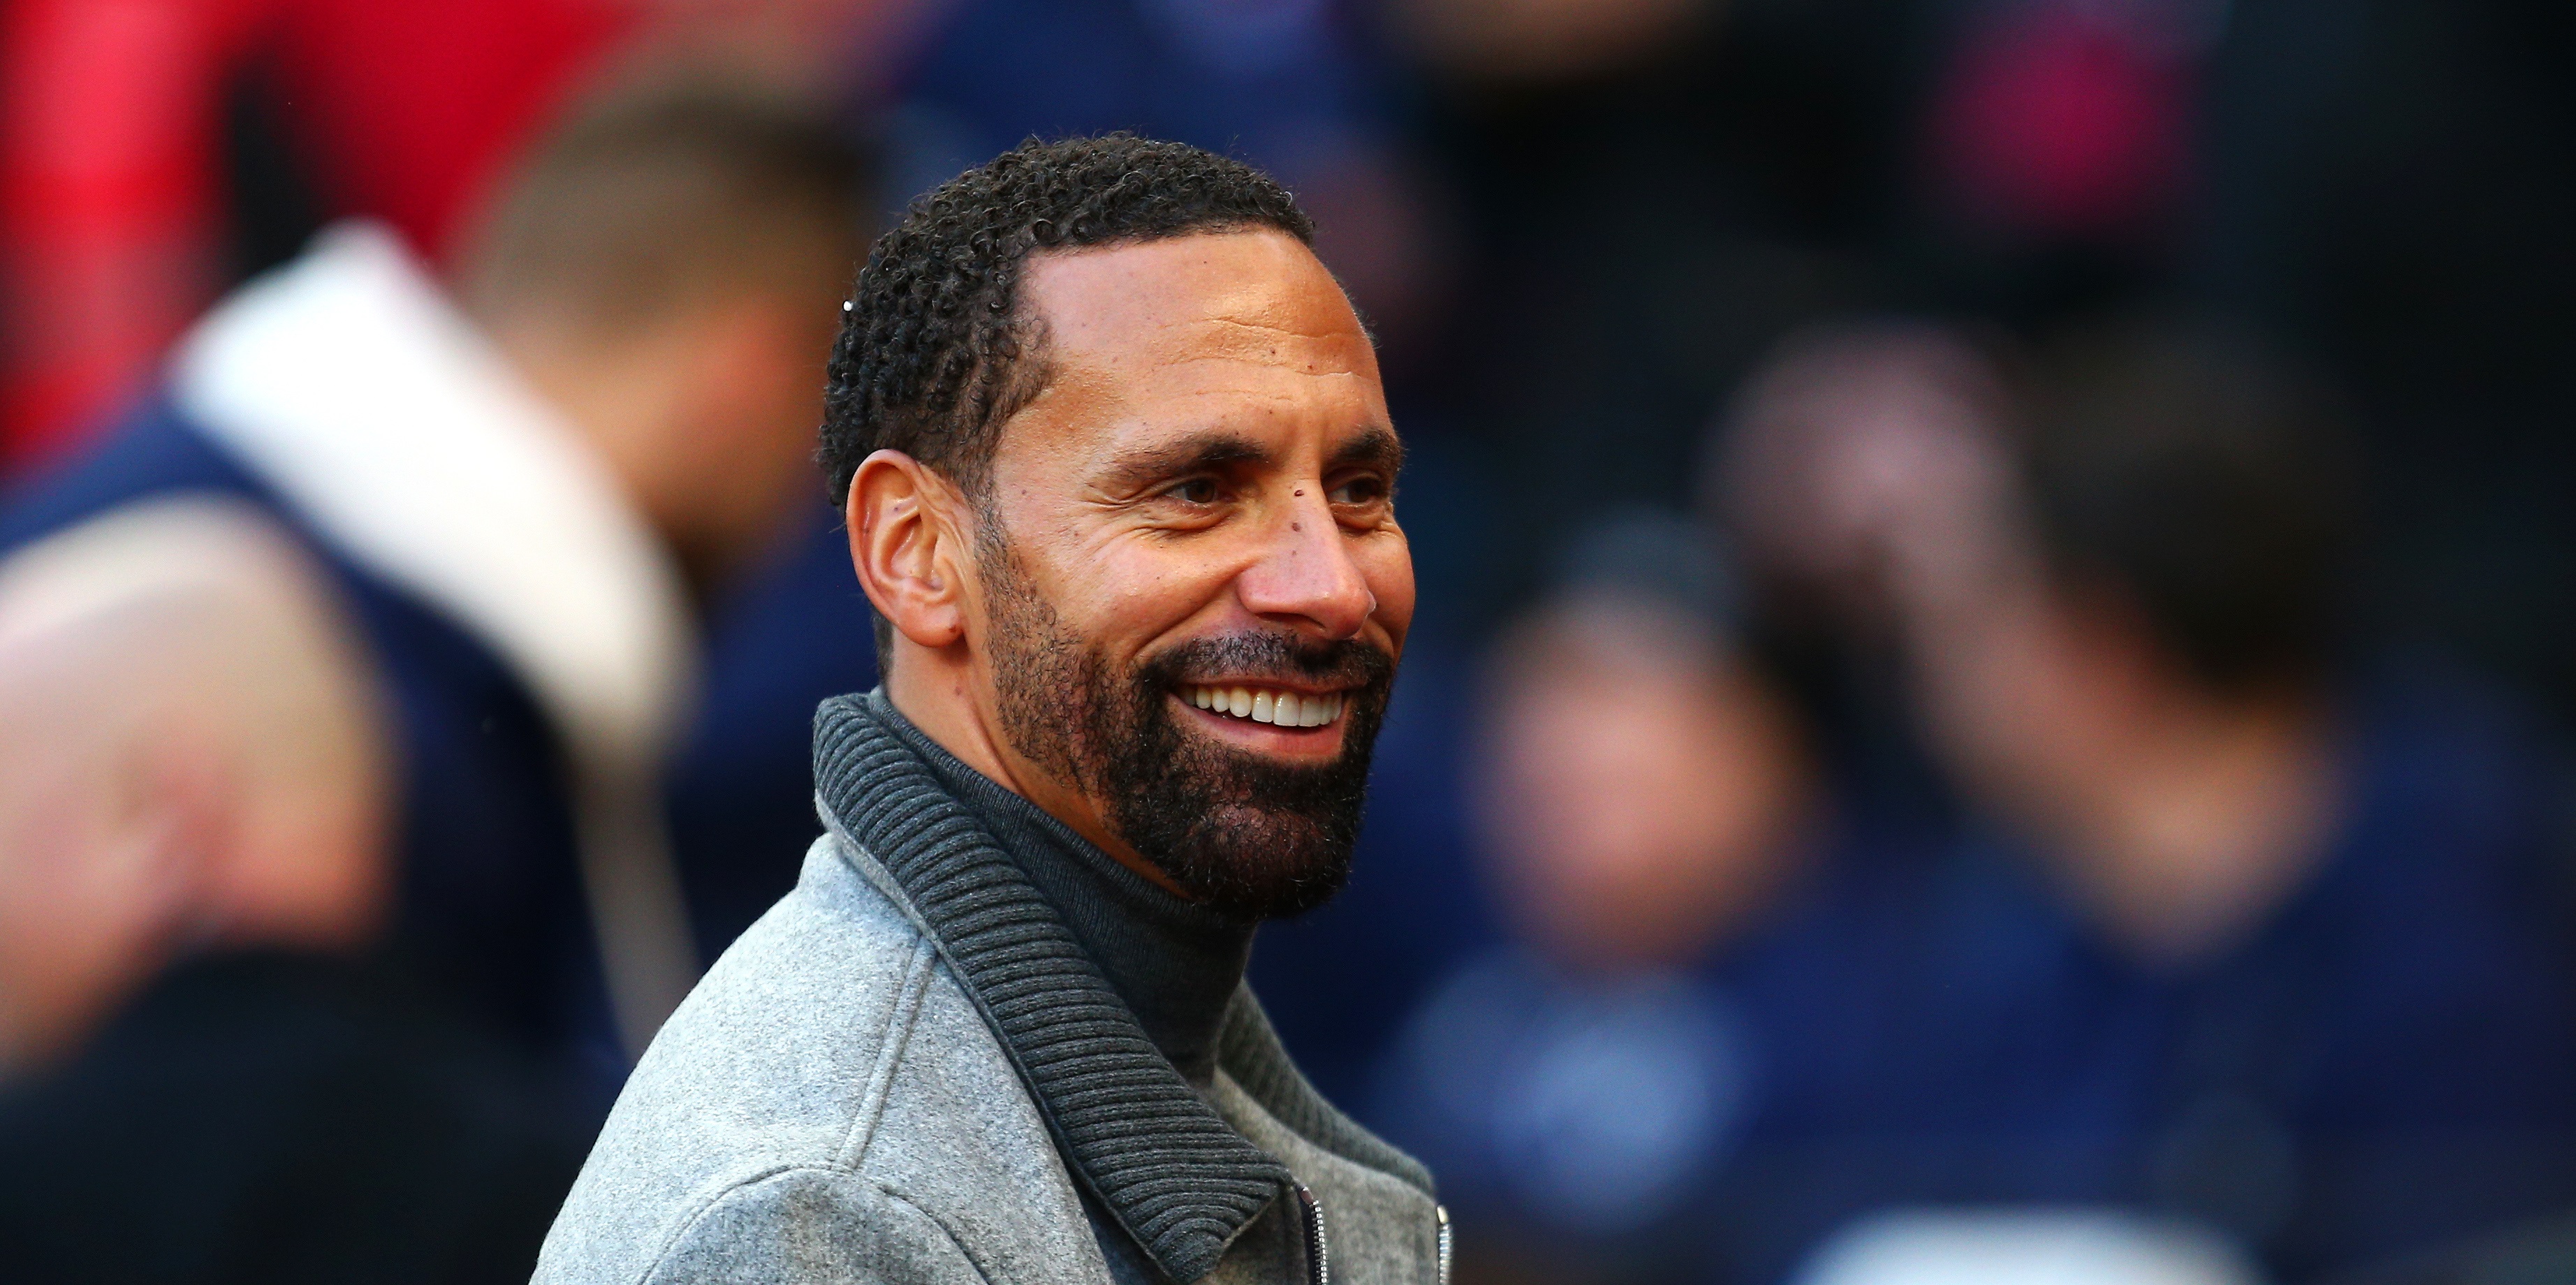 ‘He will become a leader’ – Rio Ferdinand claims Liverpool defender ‘grows’ when extra pressure is placed on him